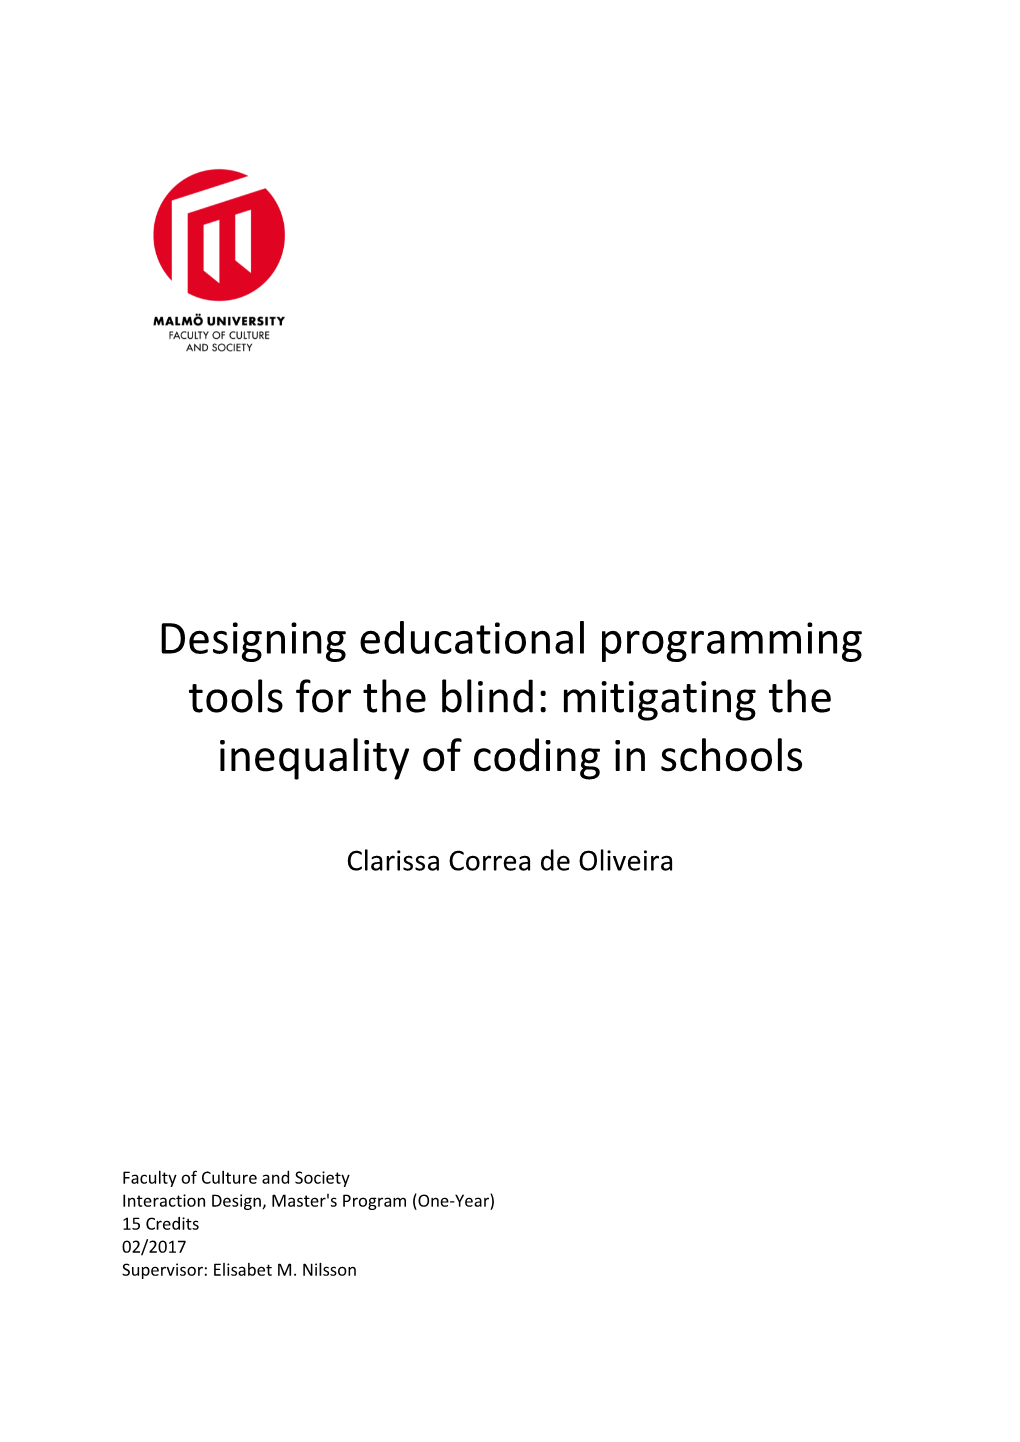 Designing Educational Programming Tools for the Blind: Mitigating the Inequality of Coding in Schools